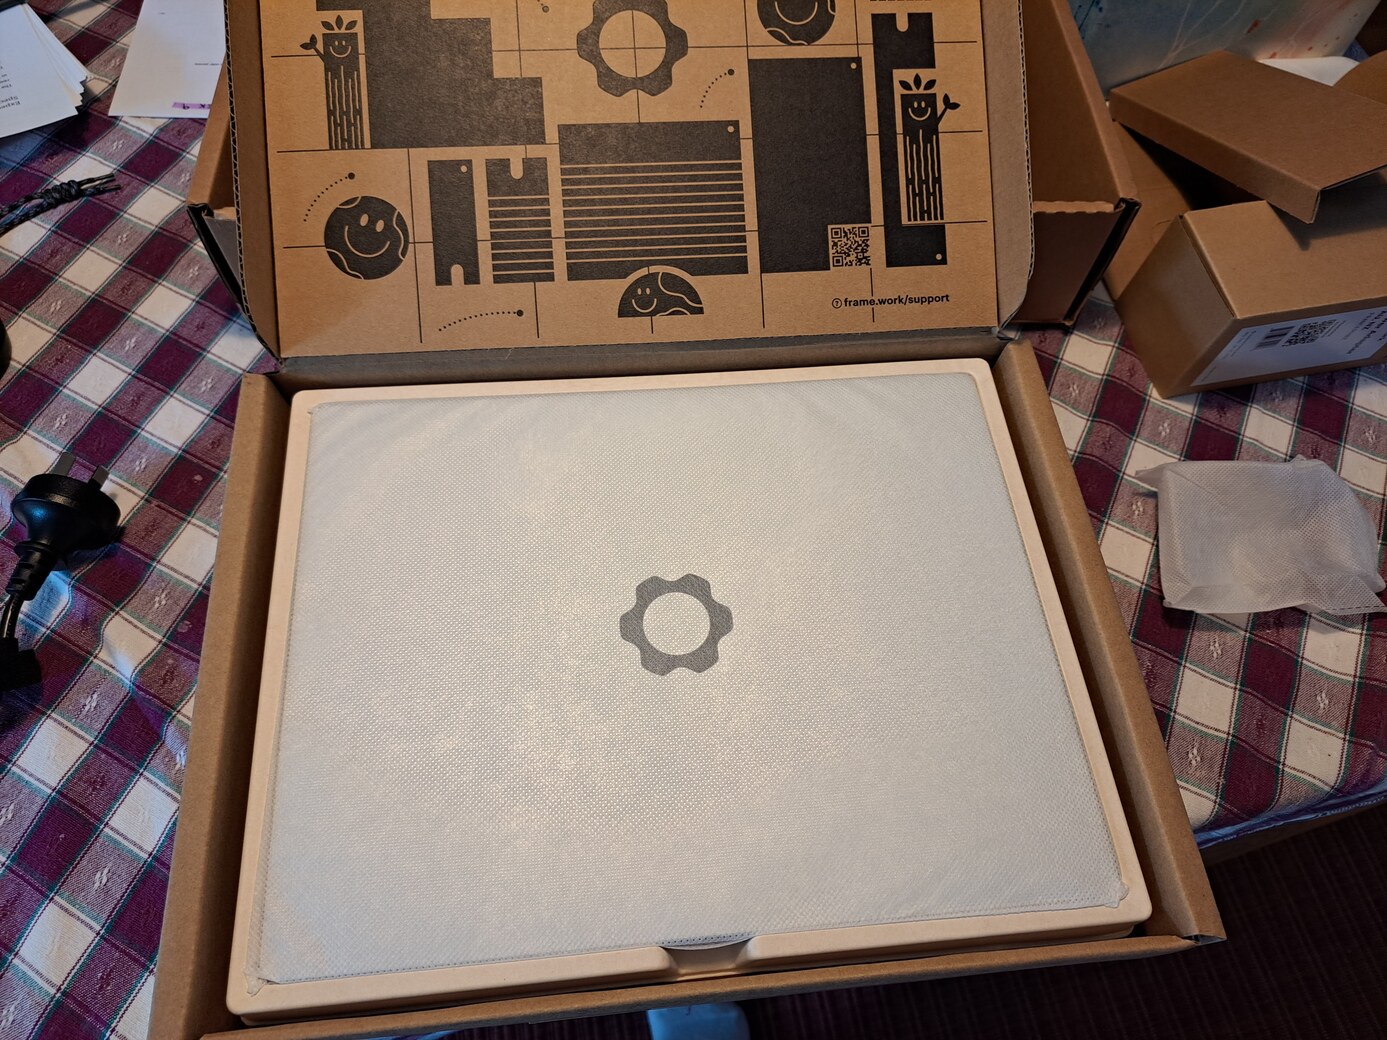 Opening the box